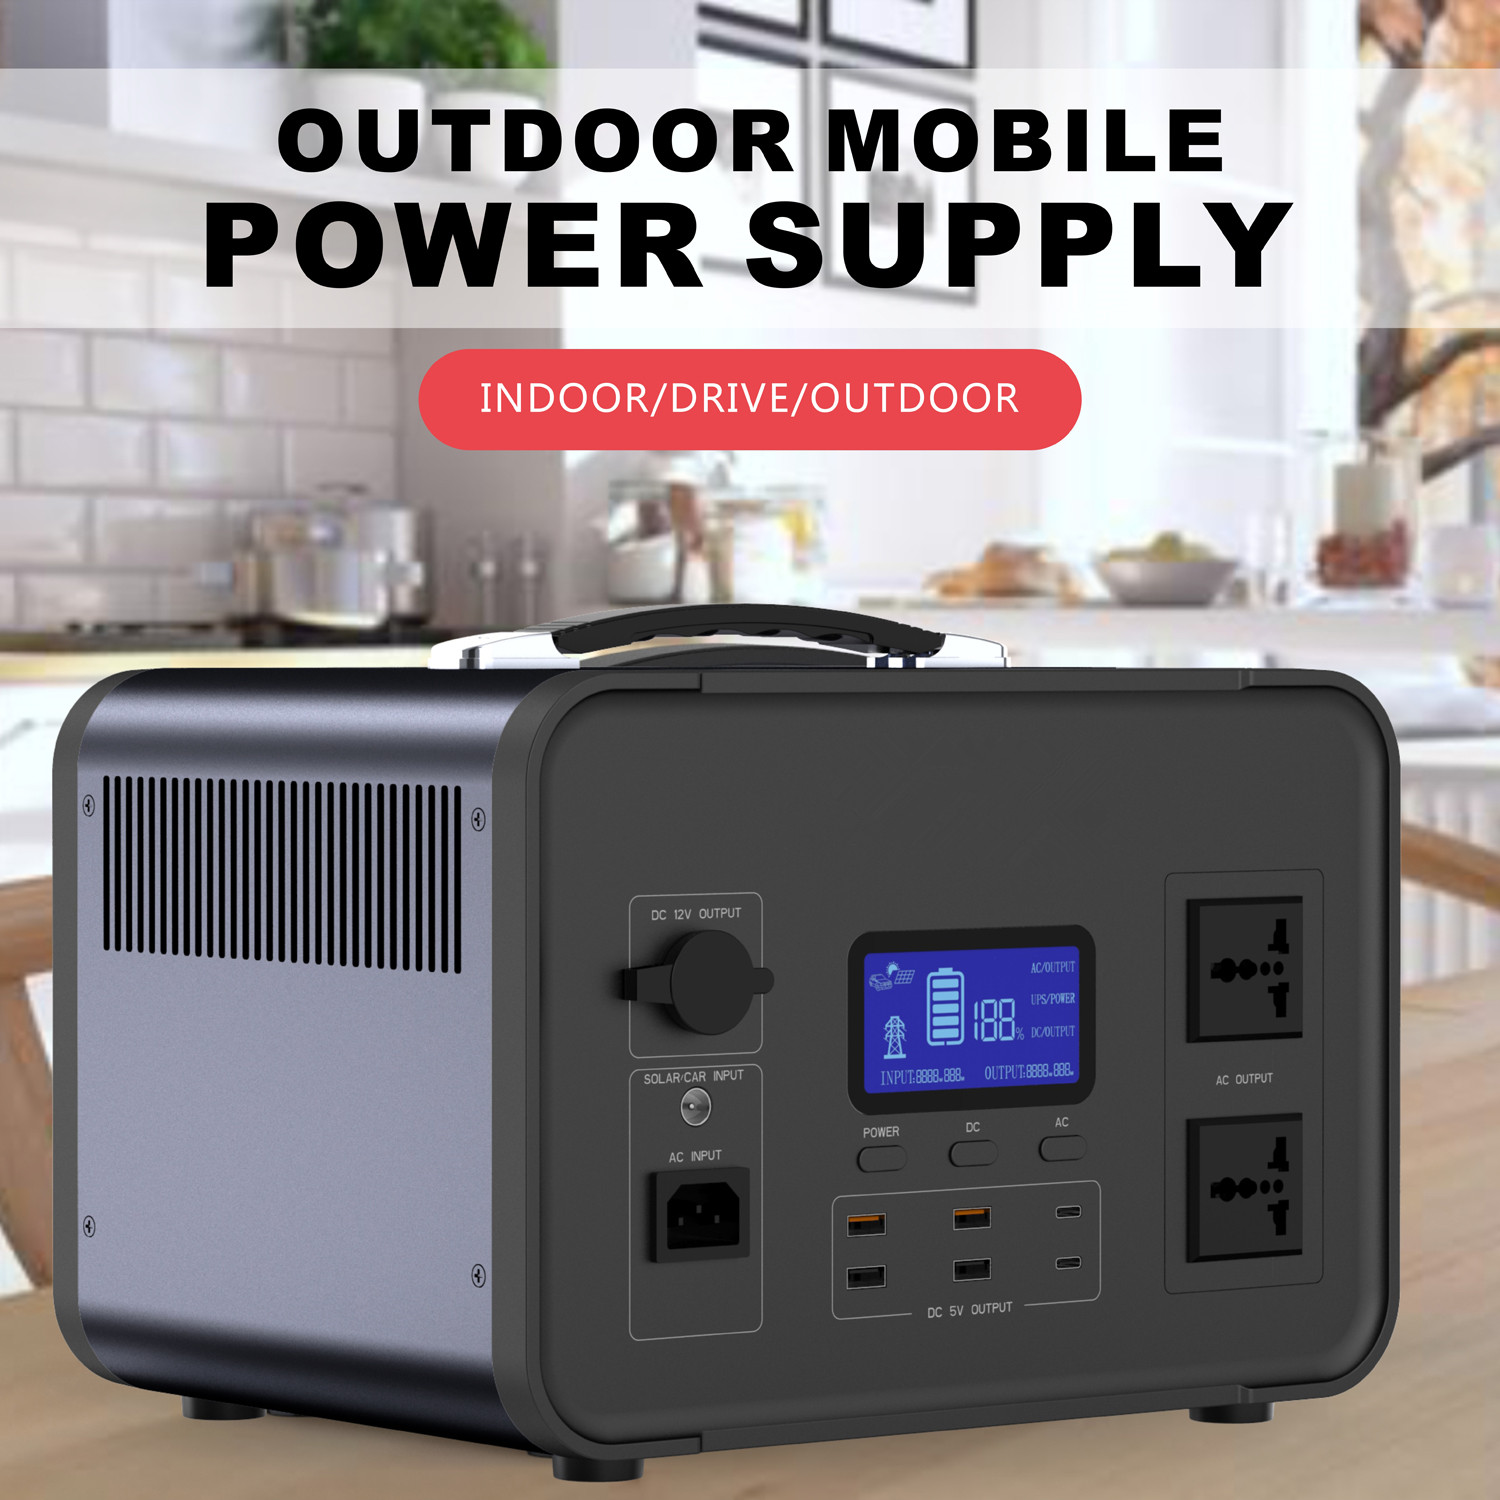 Core advantages of portable energy storage power supply